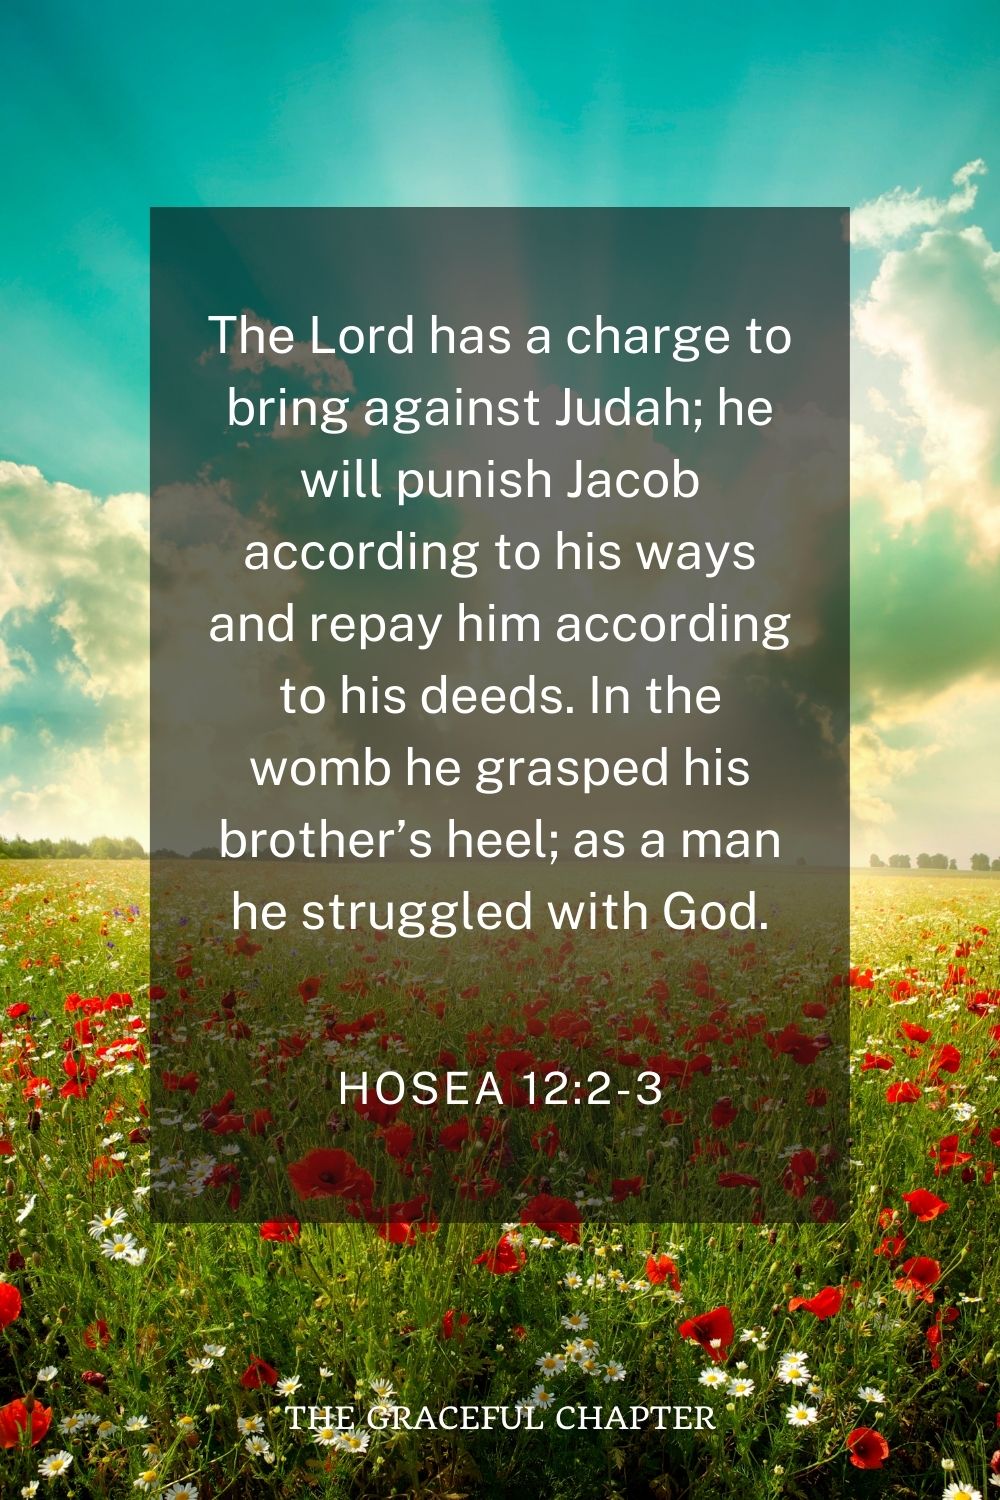 The Lord has a charge to bring against Judah; he will punish Jacob according to his ways and repay him according to his deeds. In the womb he grasped his brother’s heel; as a man he struggled with God. Hosea 12:2-3